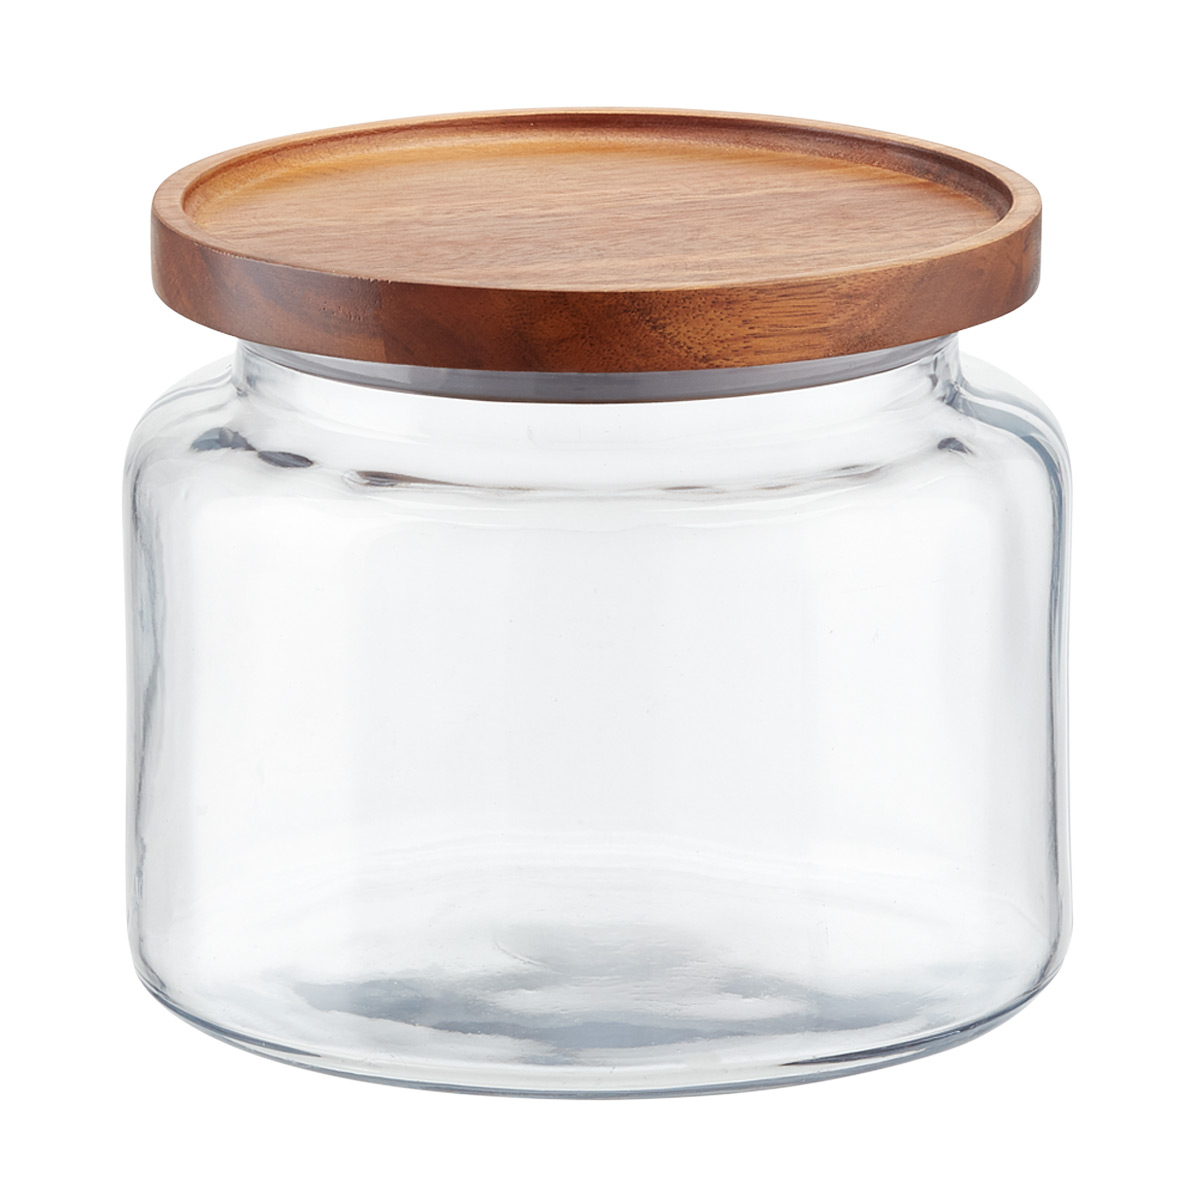 Glass container with dividers and bamboo lid